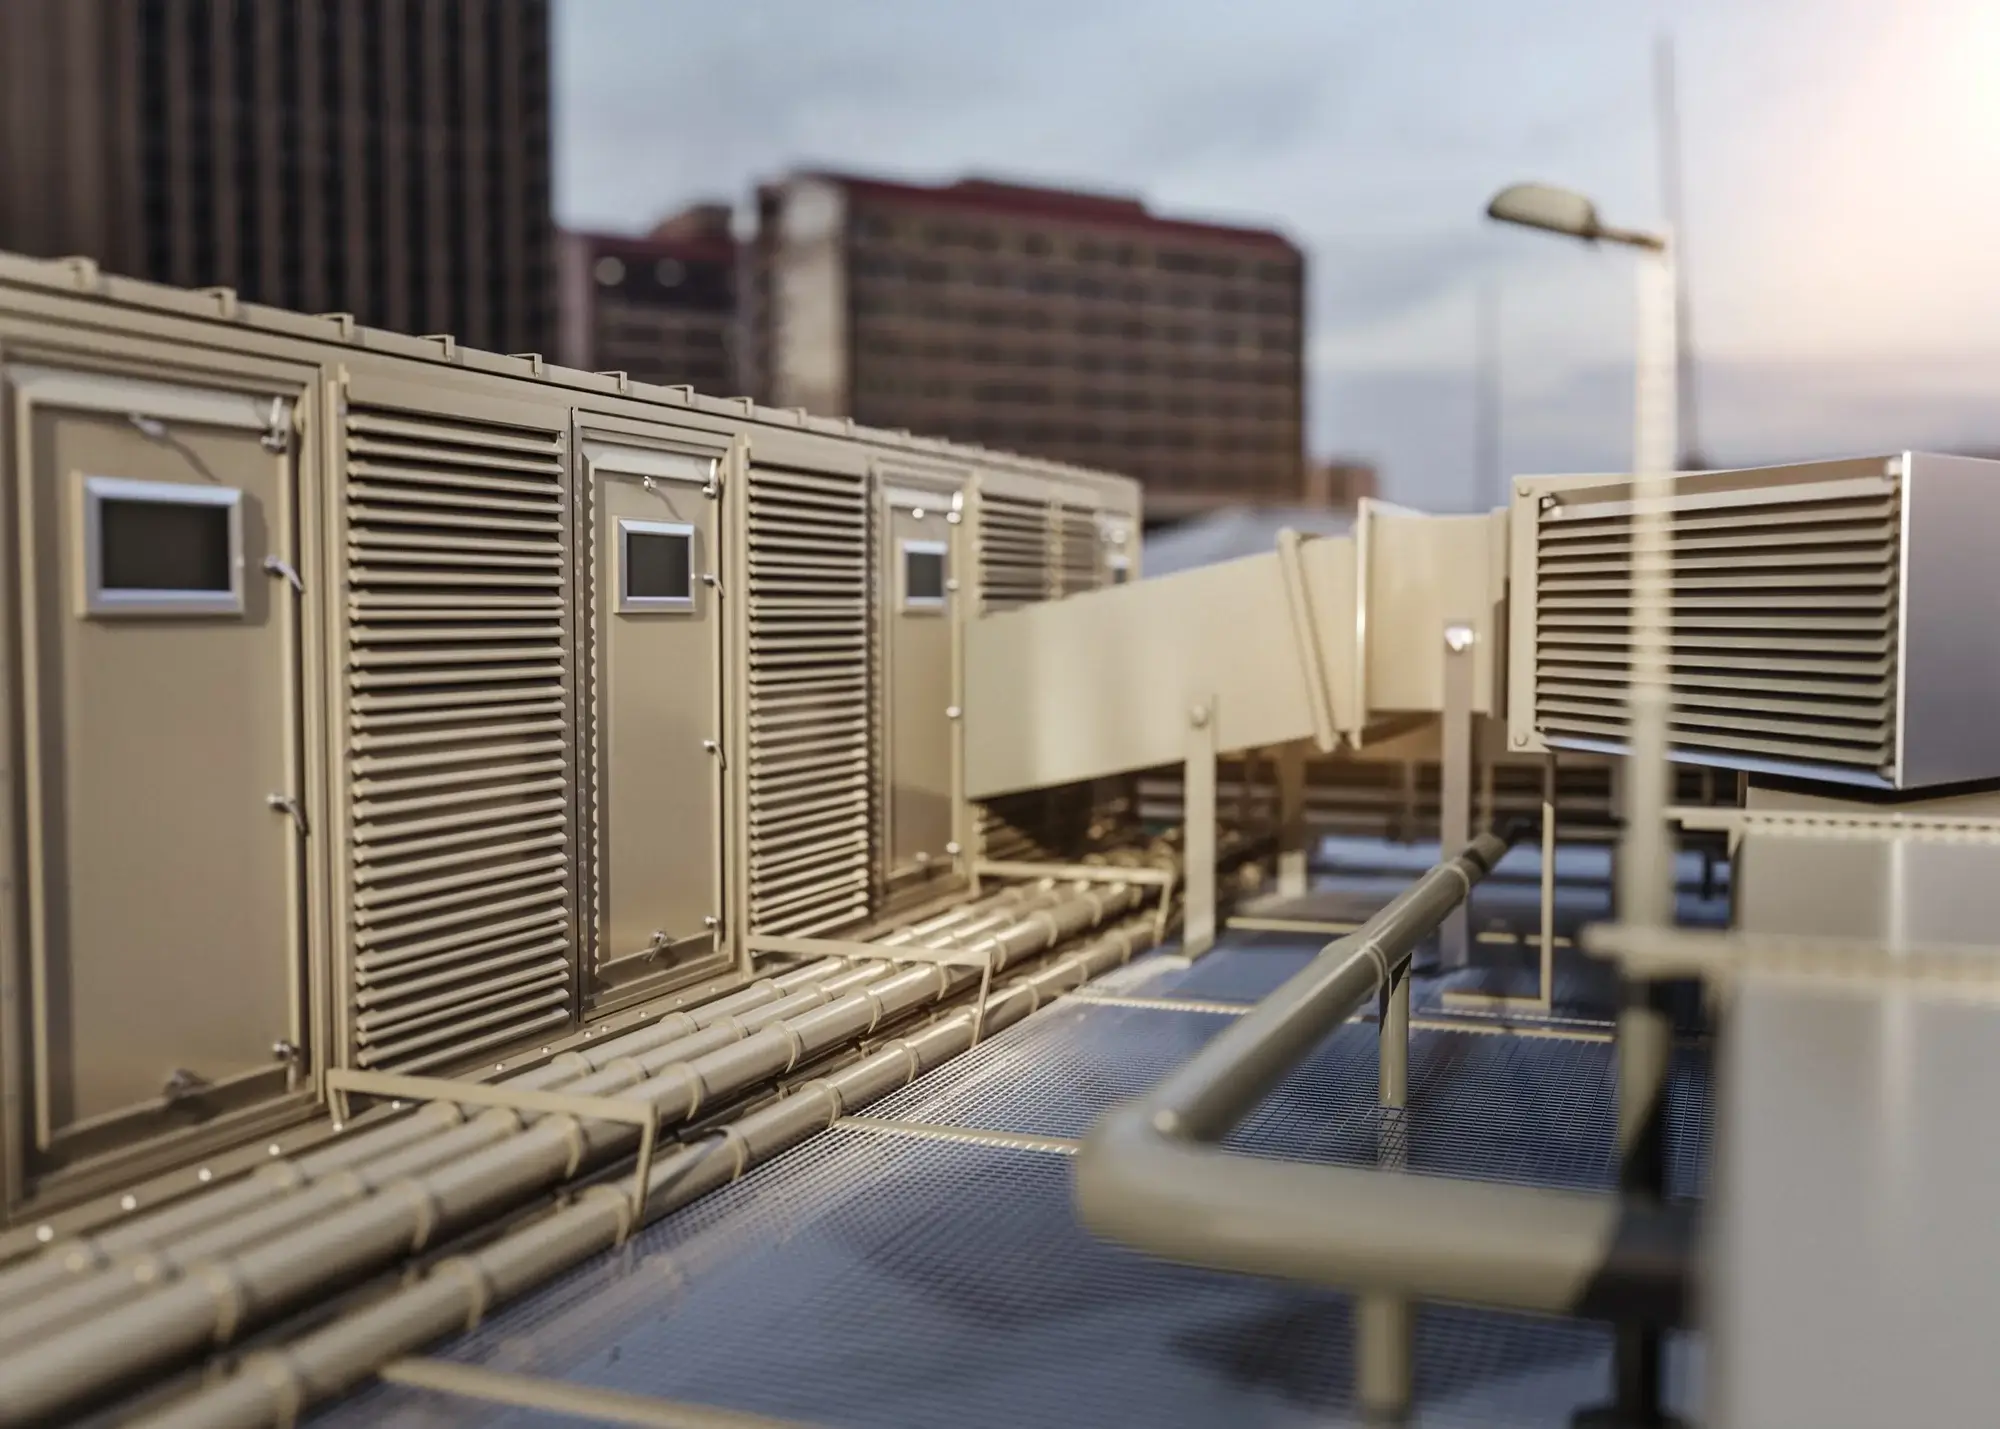 Demystifying Air Conditioning and Central Heating/Cooling Systems: How Do They Work?